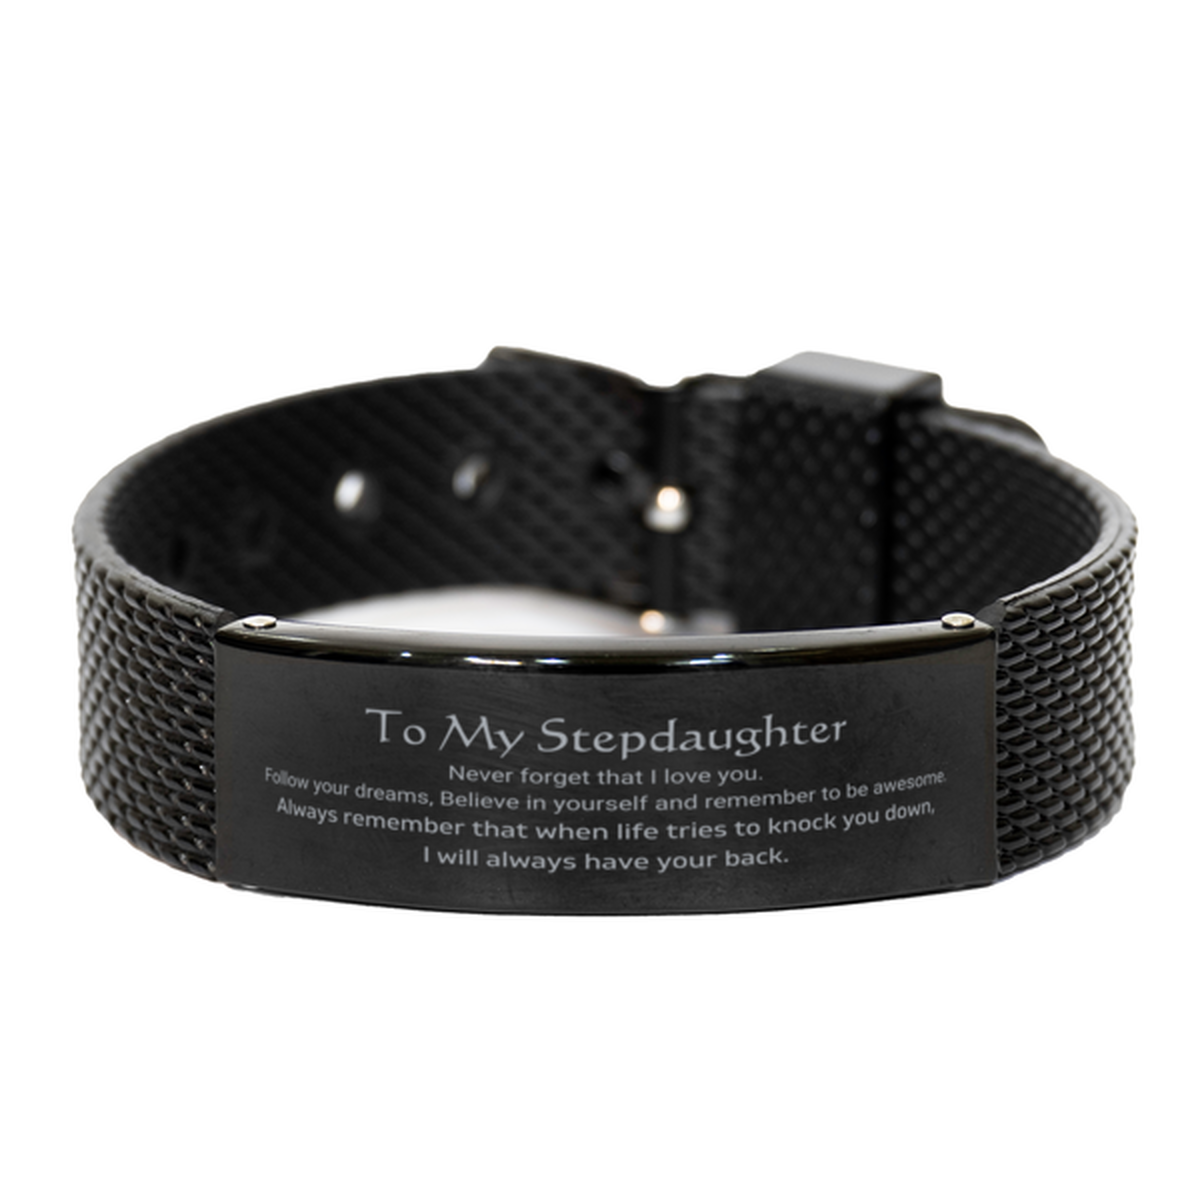 Inspirational Gifts for Stepdaughter, Follow your dreams, Believe in yourself, Stepdaughter Black Shark Mesh Bracelet, Birthday Christmas Unique Gifts For Stepdaughter